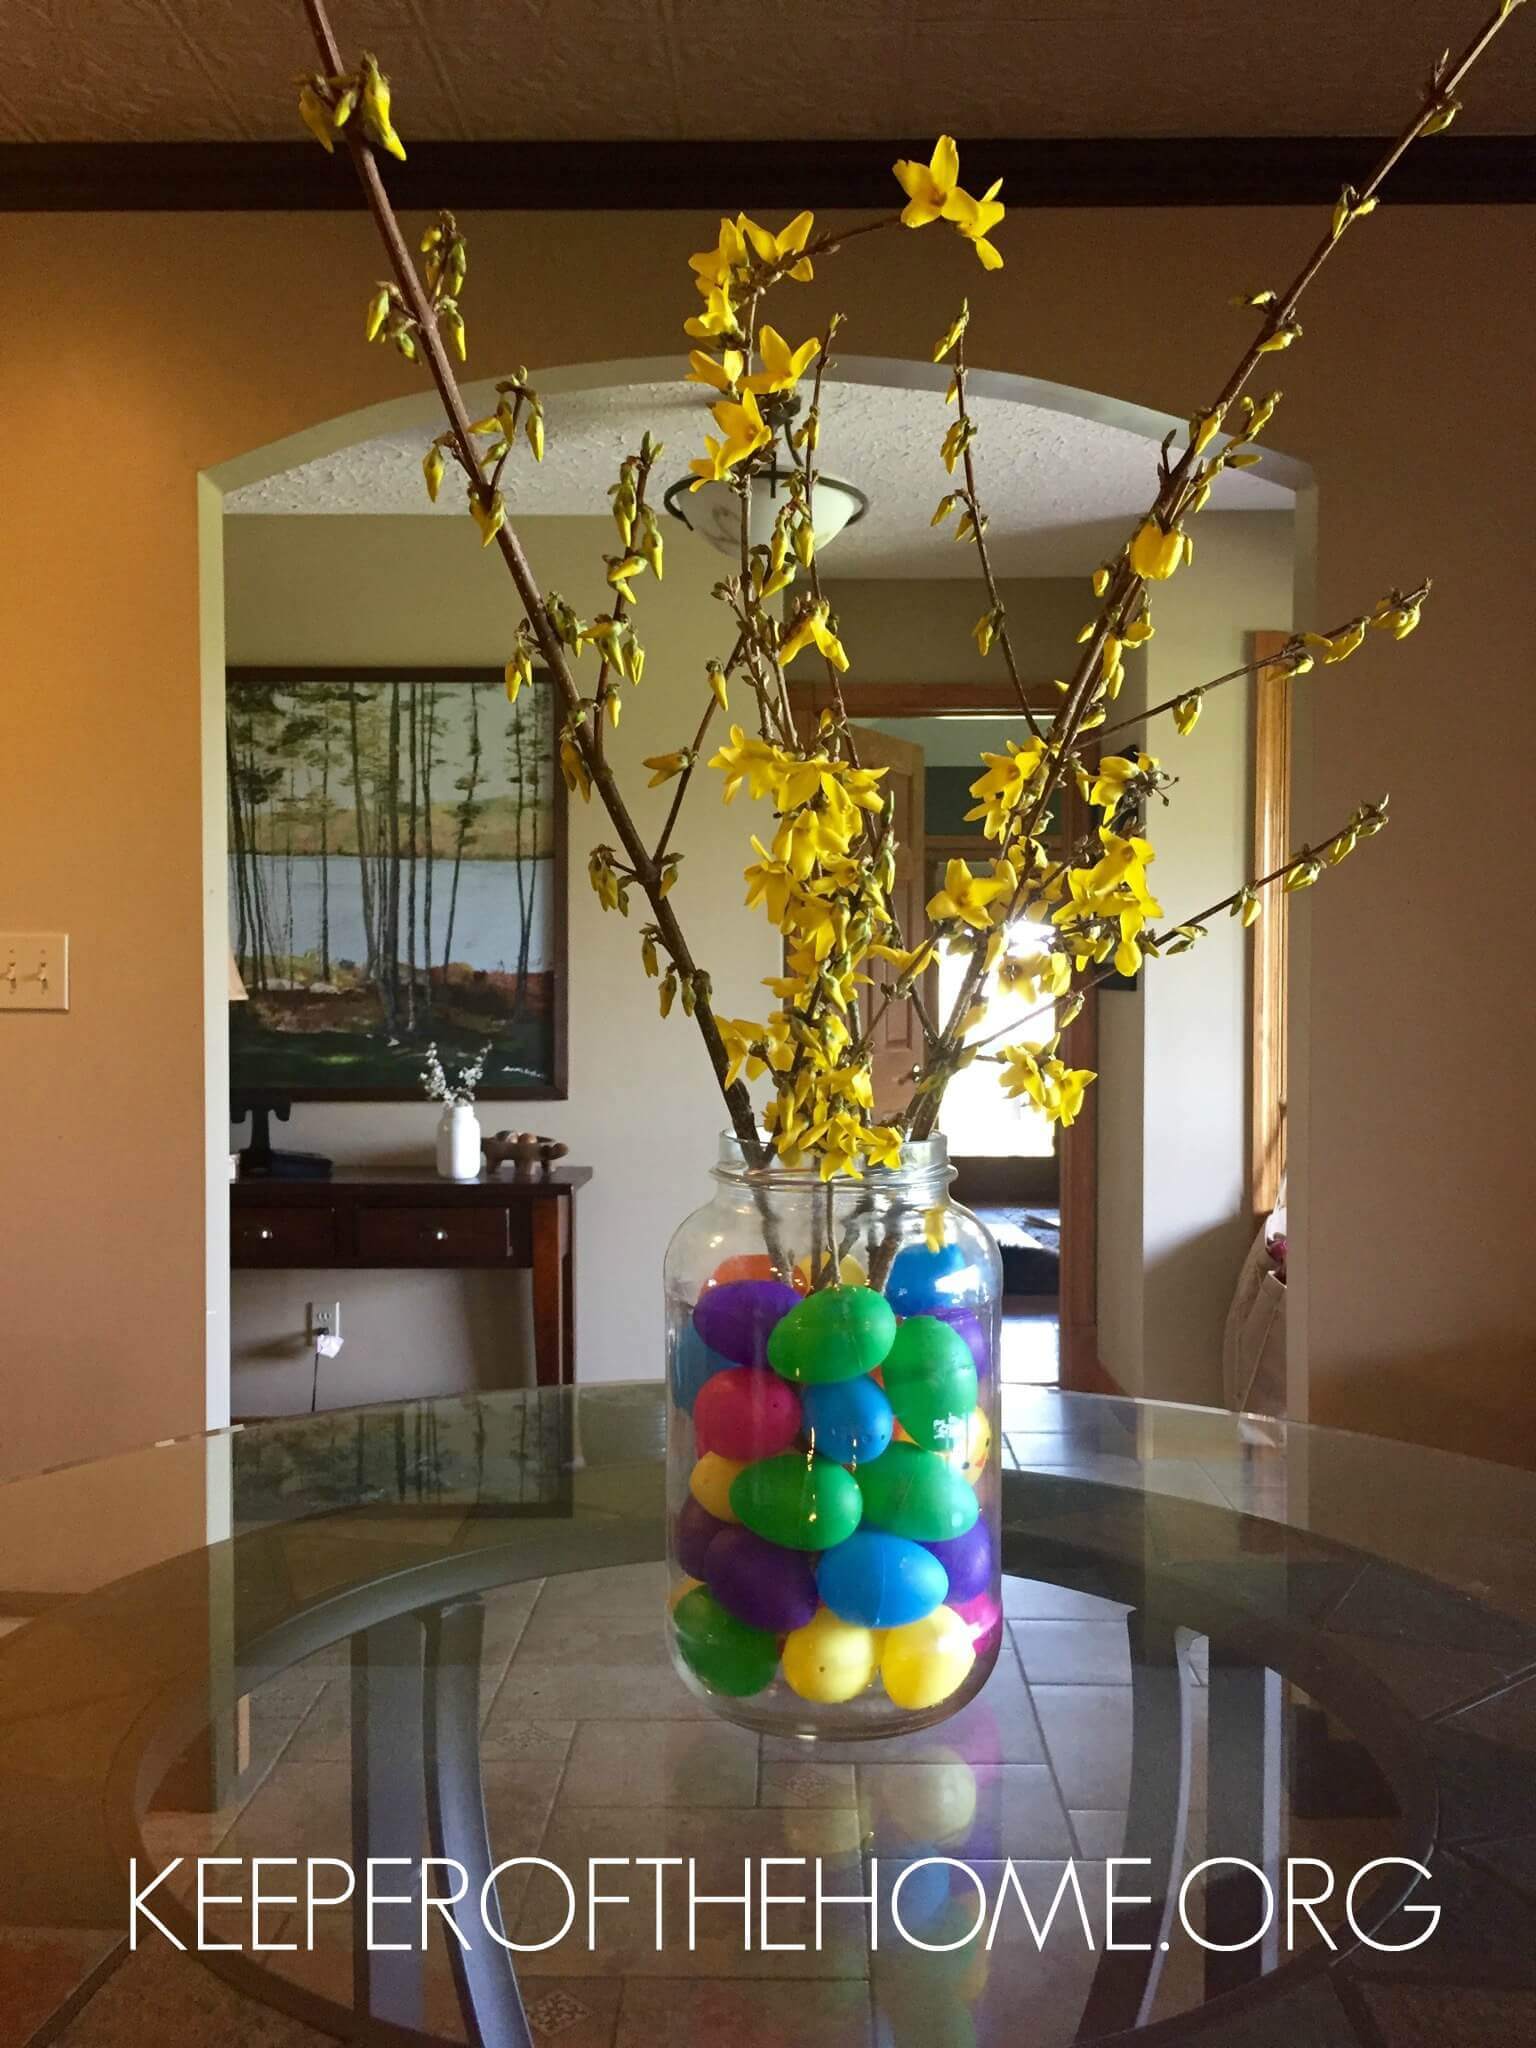 Looking for easy Easter decorations to put together with your kids or at the last minute? If you are anything like me, you have a few (dozen!) mason jars around the house. Let's put them to use!